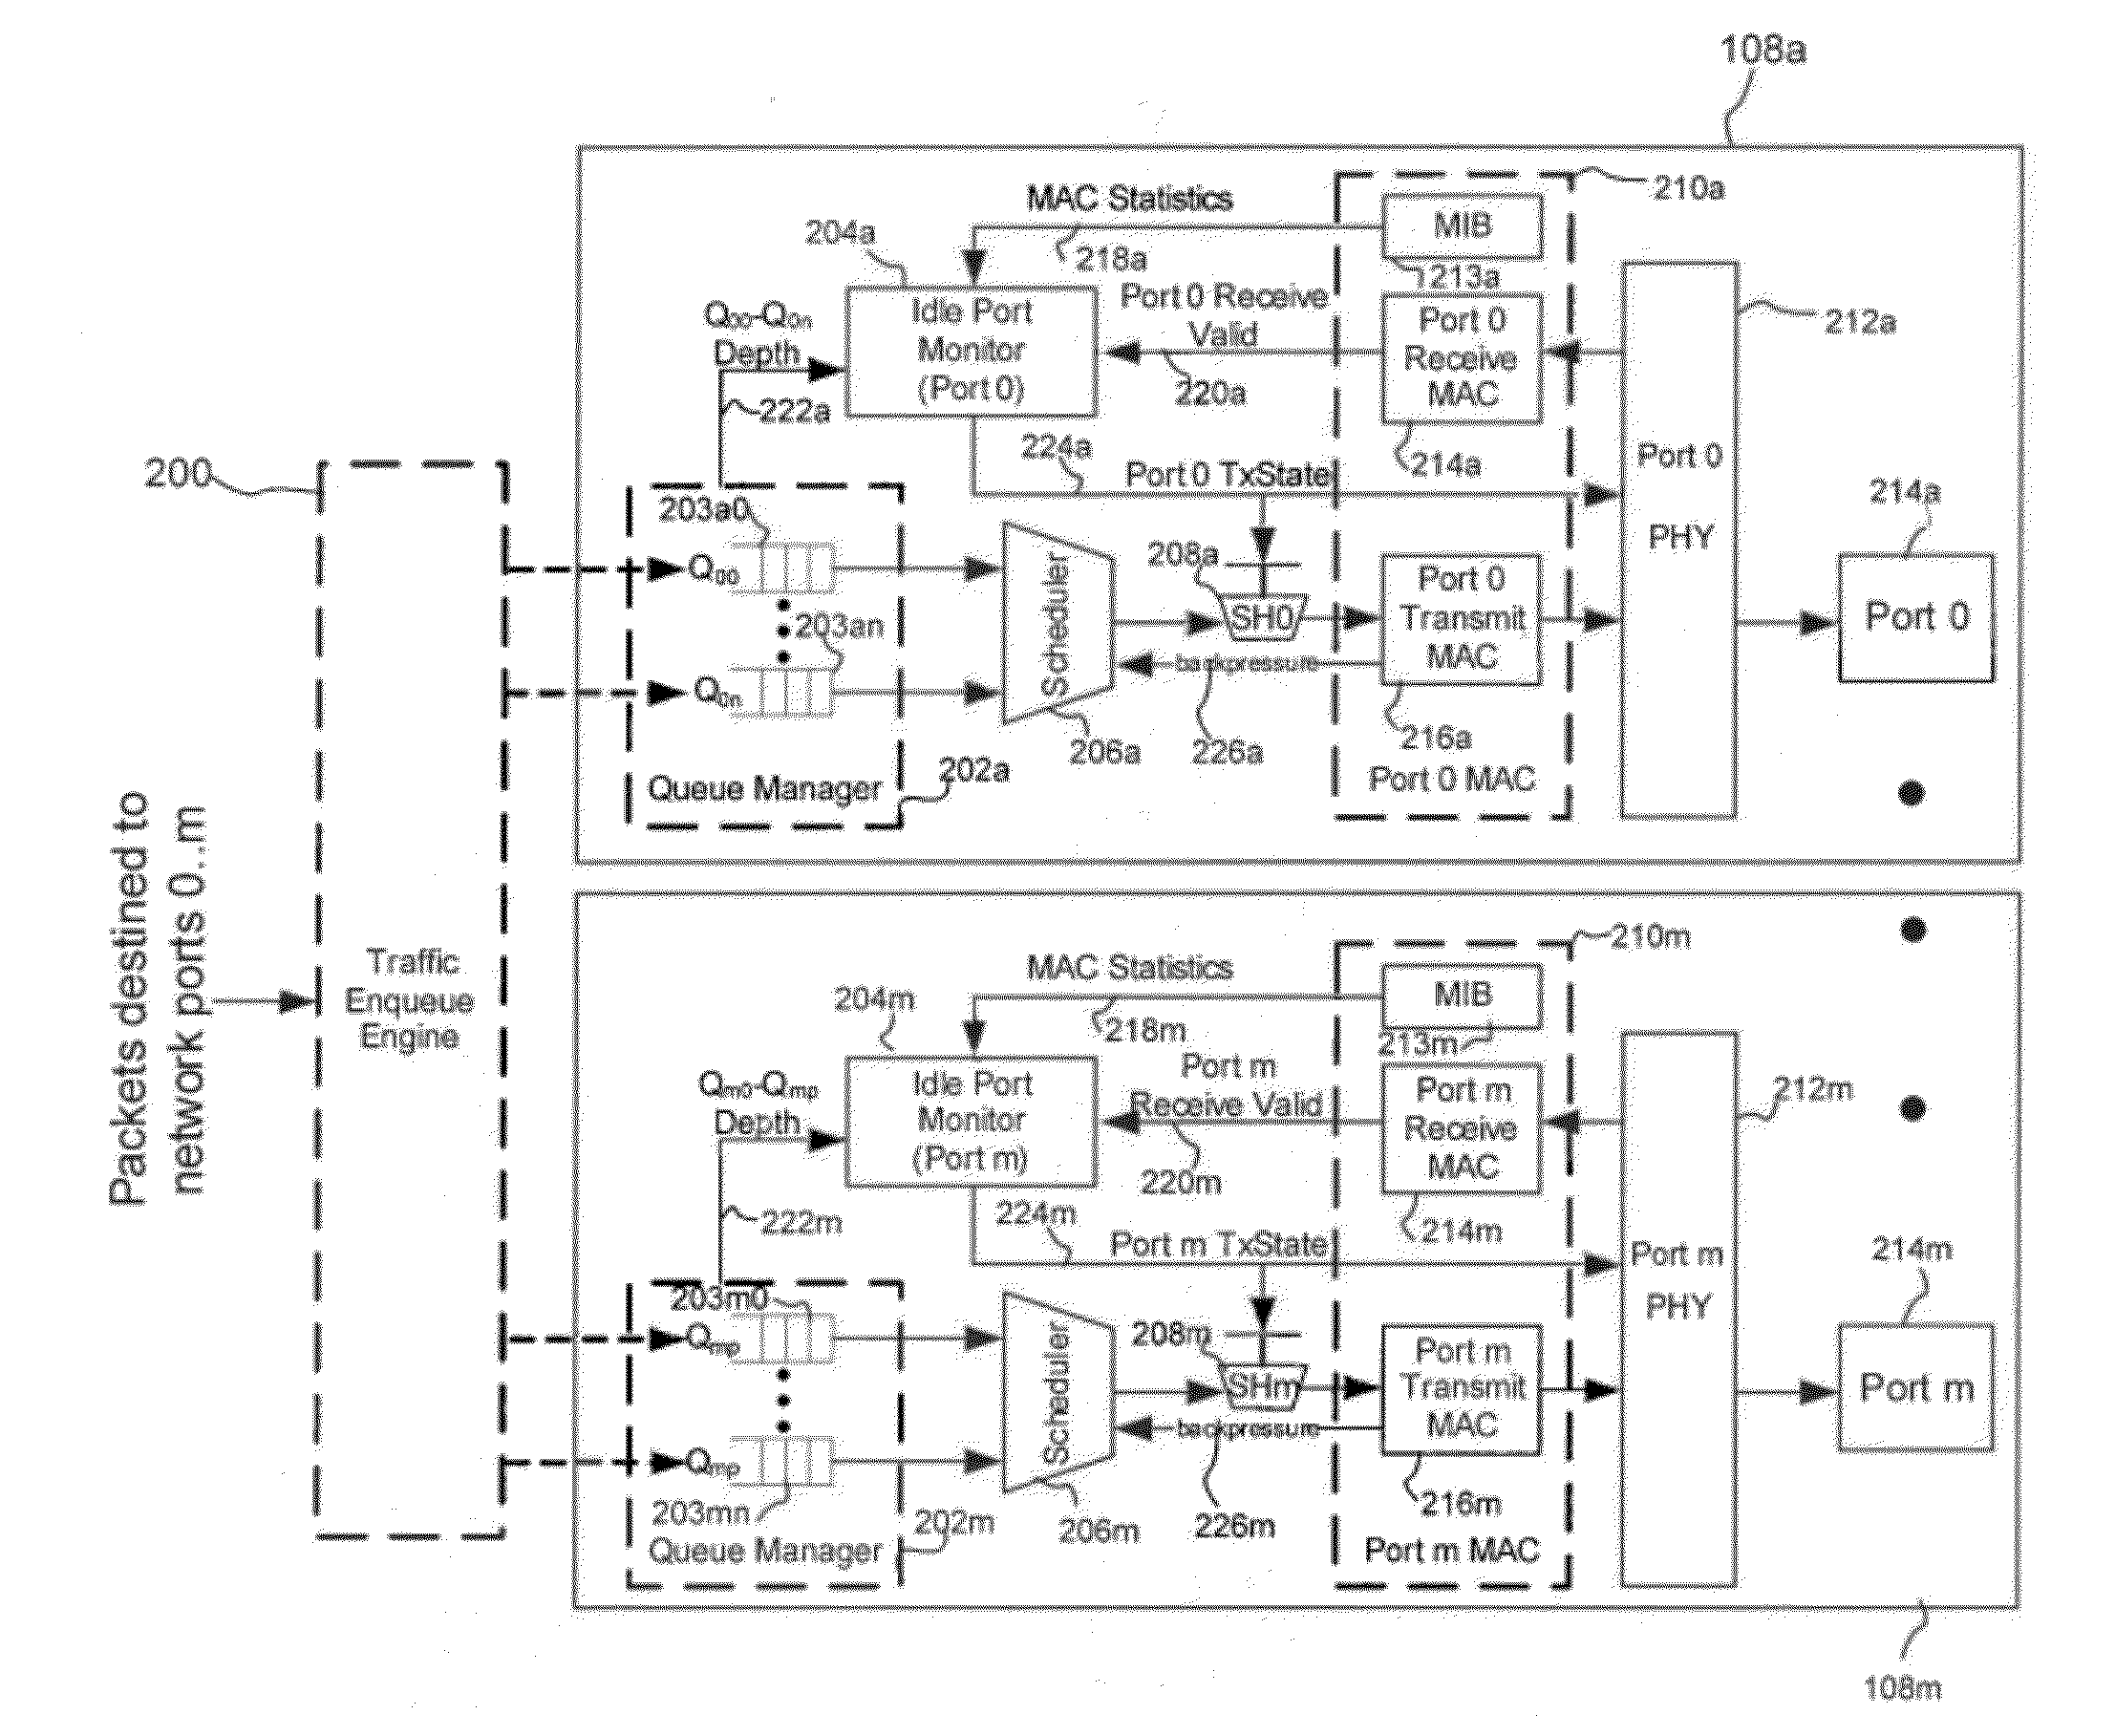 Dynamic power management in a communications device